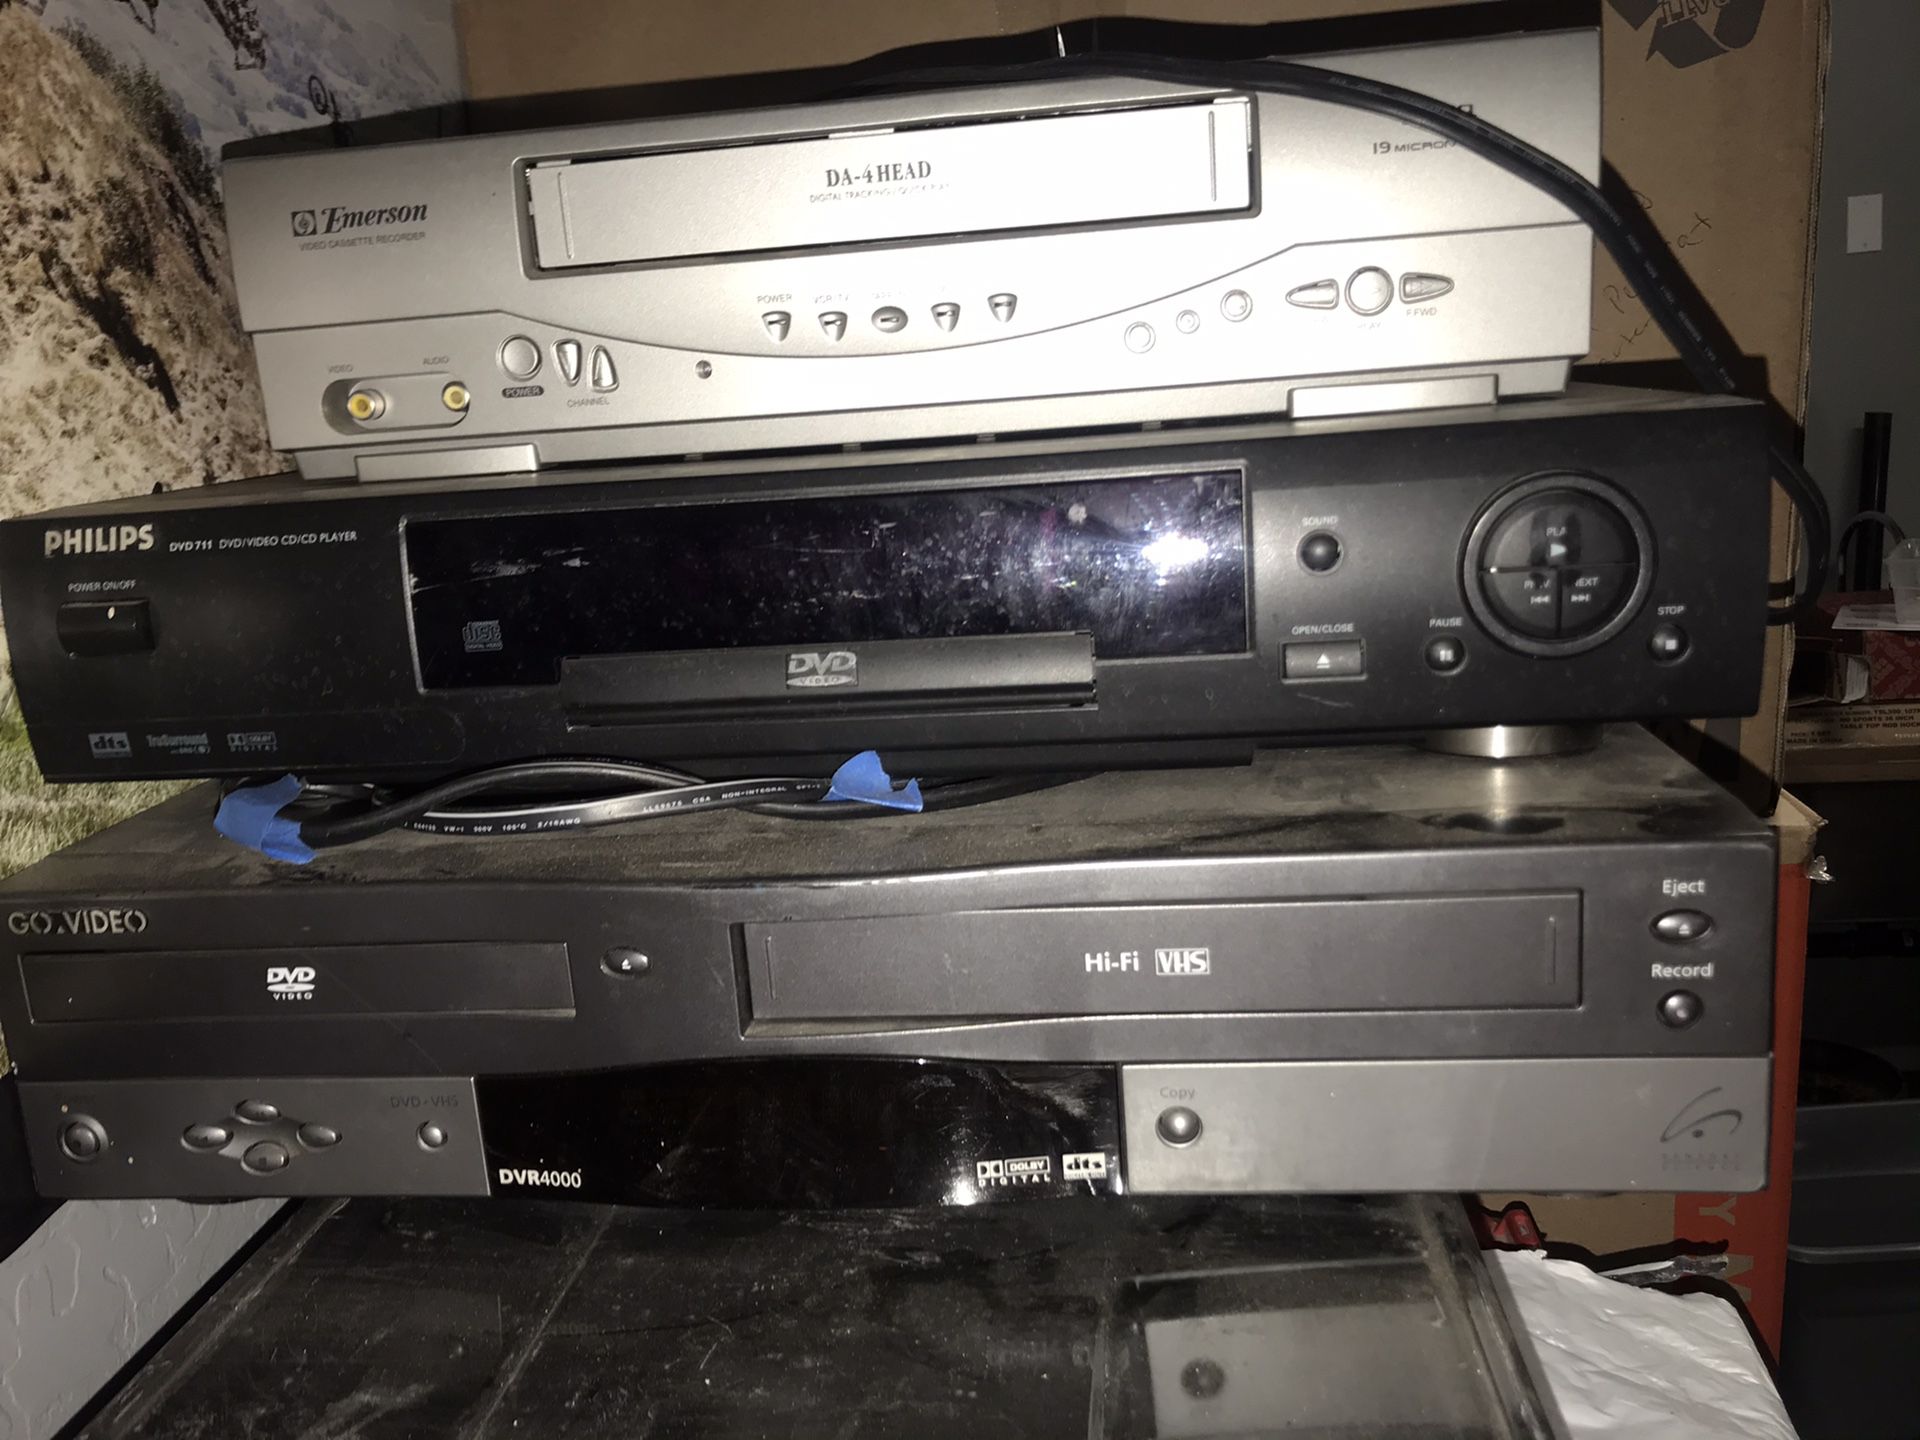 VHS player, DVD player and combo